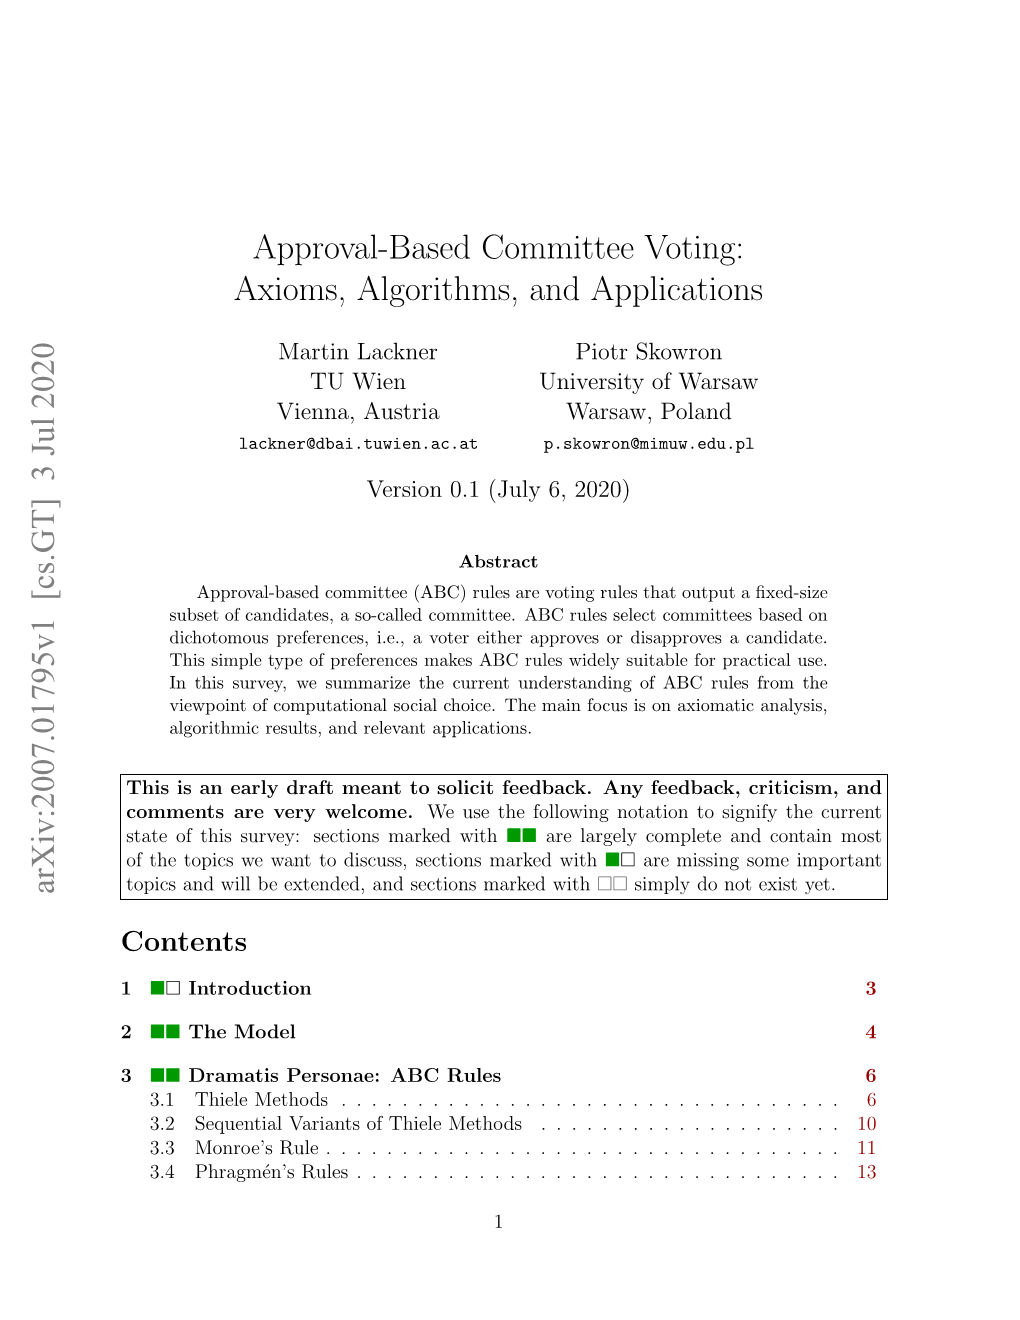 Approval-Based Committee Voting: Axioms, Algorithms, and Applications